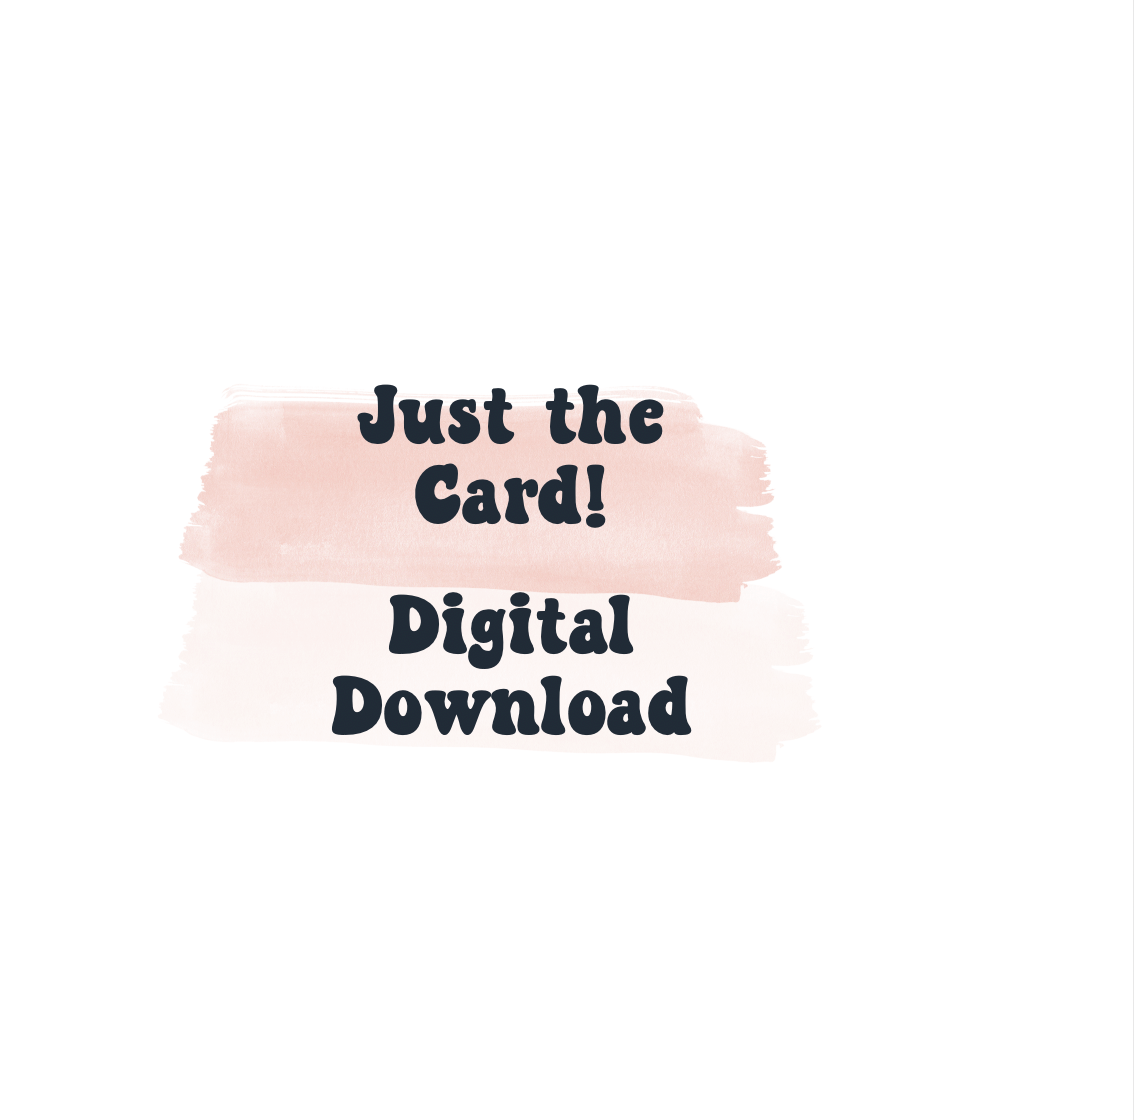 Just the Digital Download